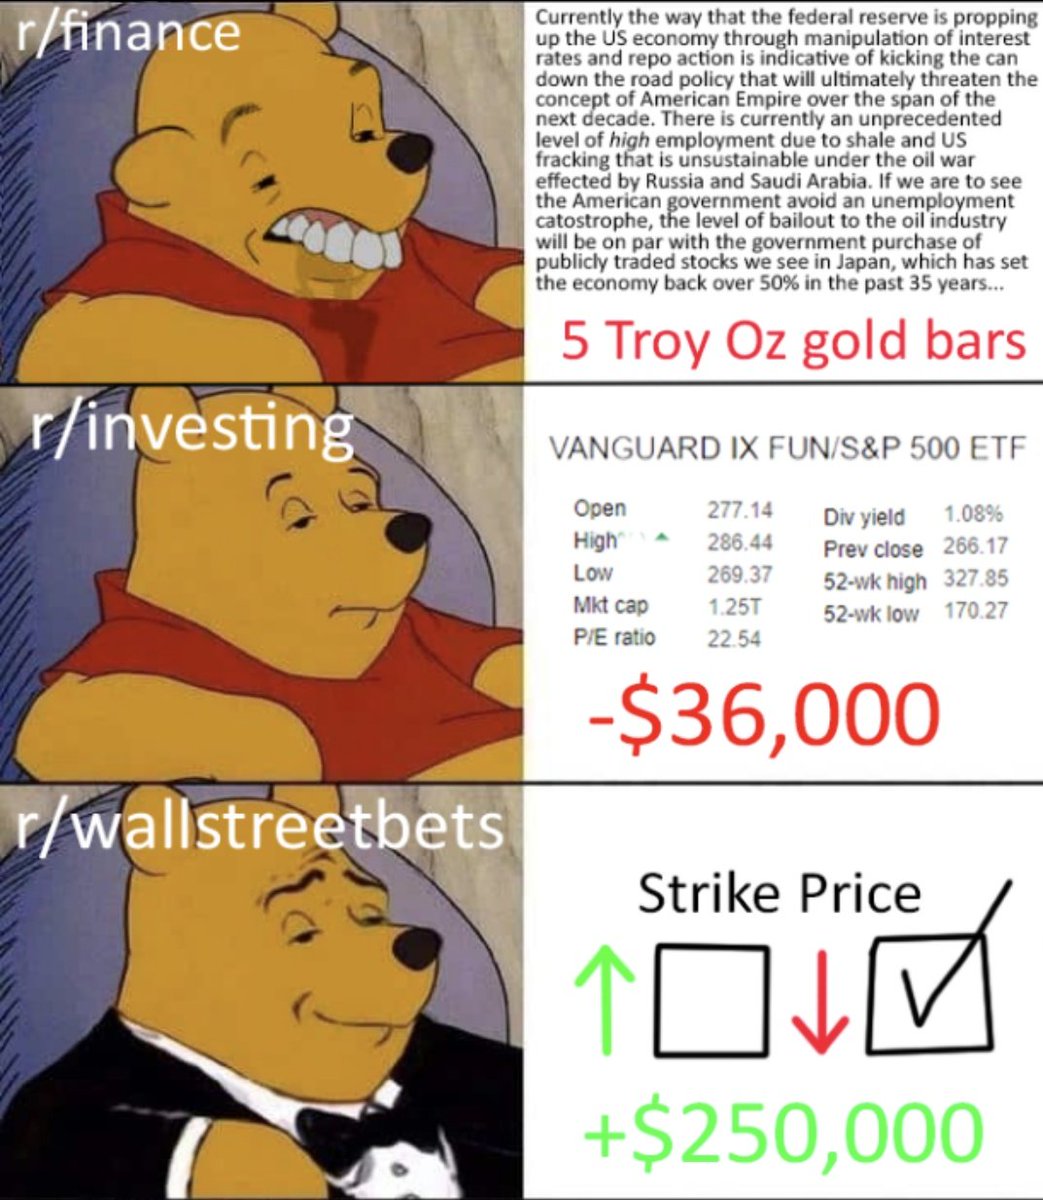 This meme is used to explain WSB to newcomers and encourage people to explore options trading most likely without fully understanding it.